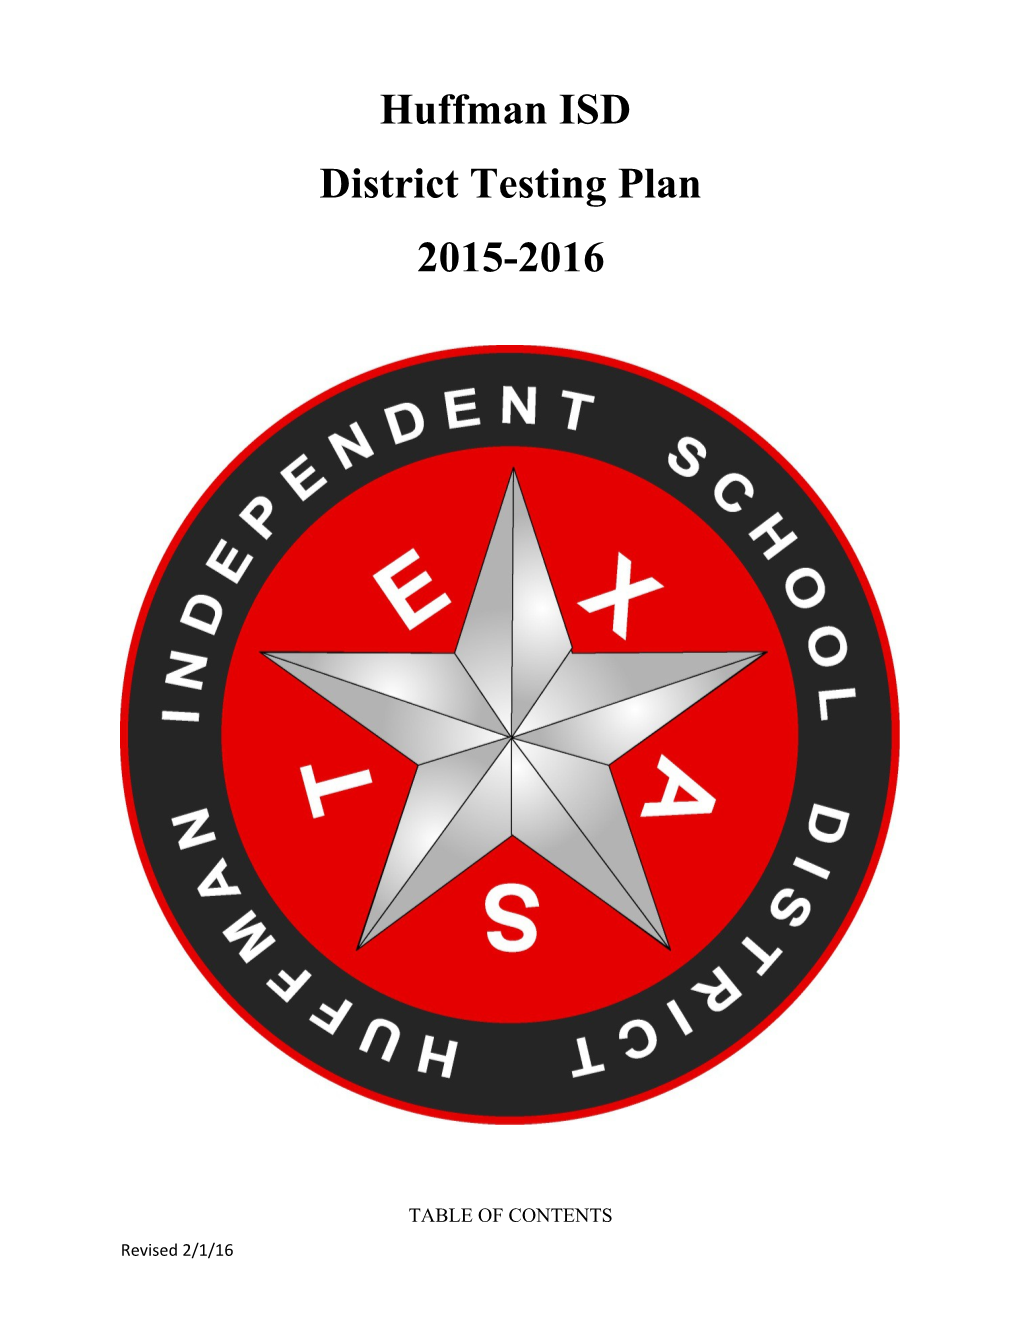 Huffman ISD District Assessment Guidelines 2015-2016